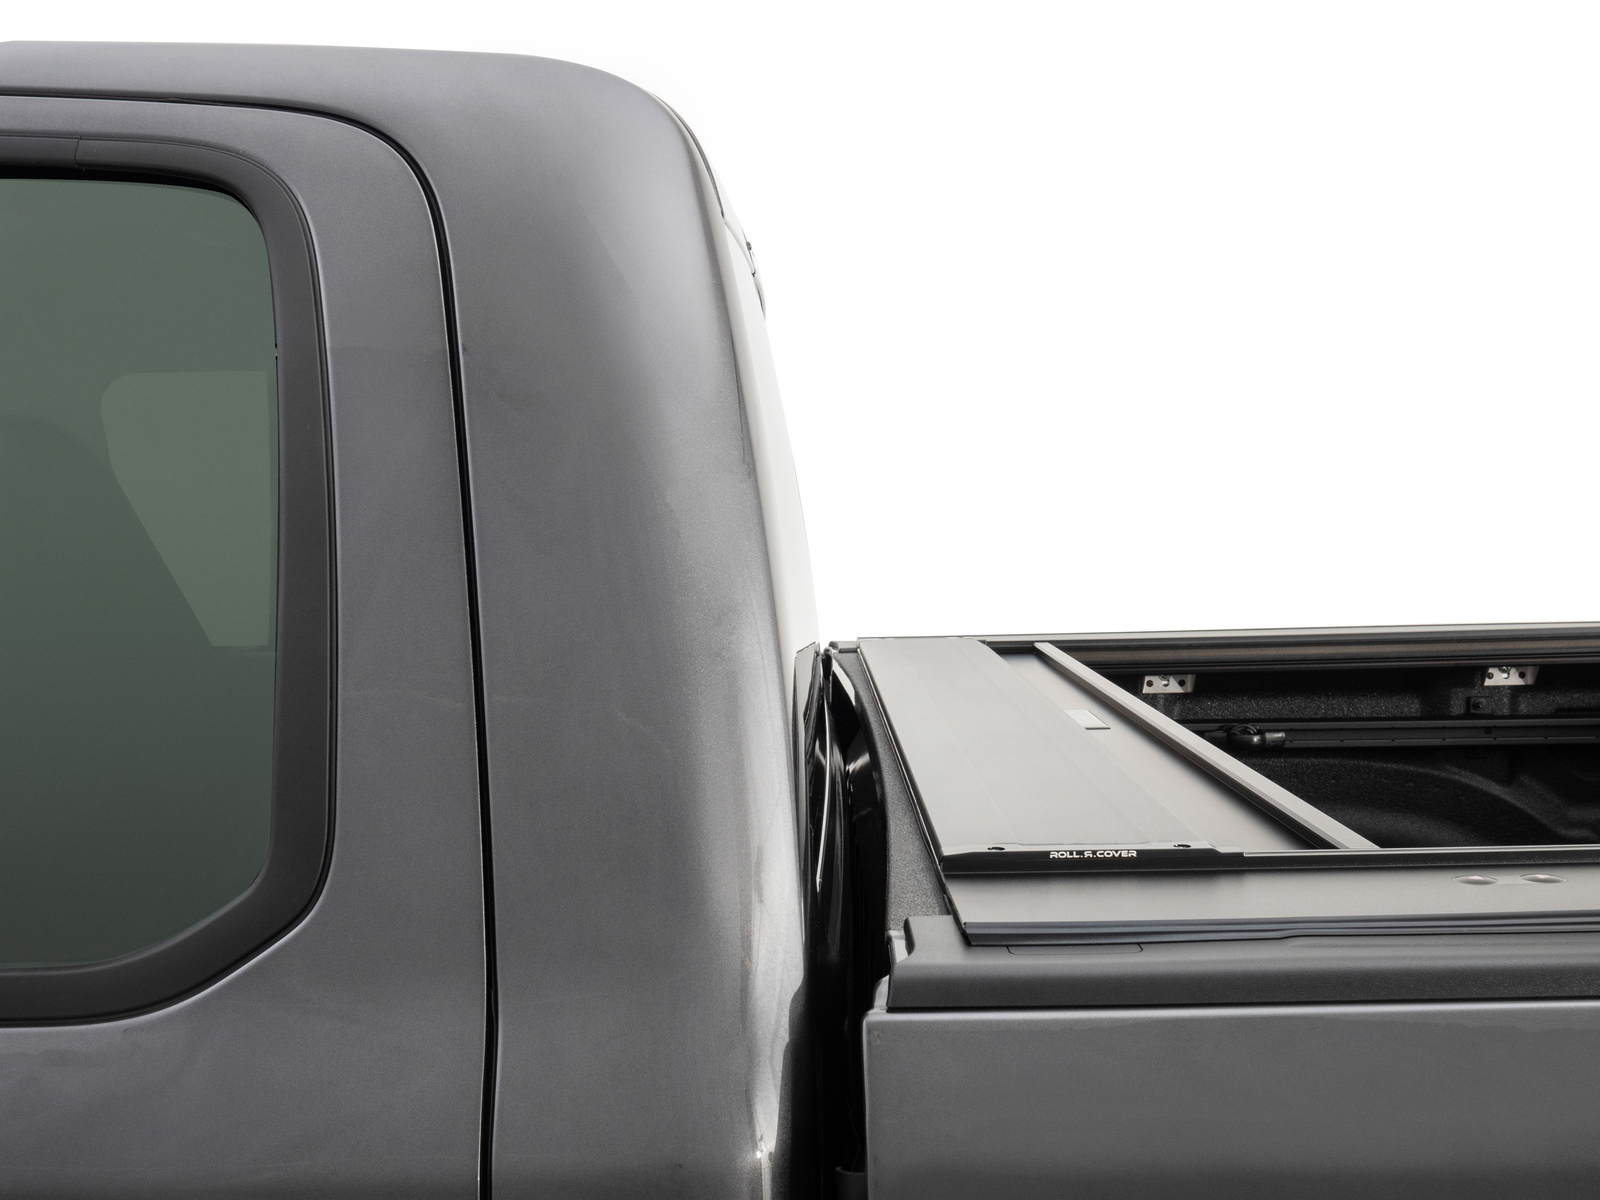 HSP Roll R Cover Series 3 To Suit Ram 1500 DS 2018+ 5'7" Tub